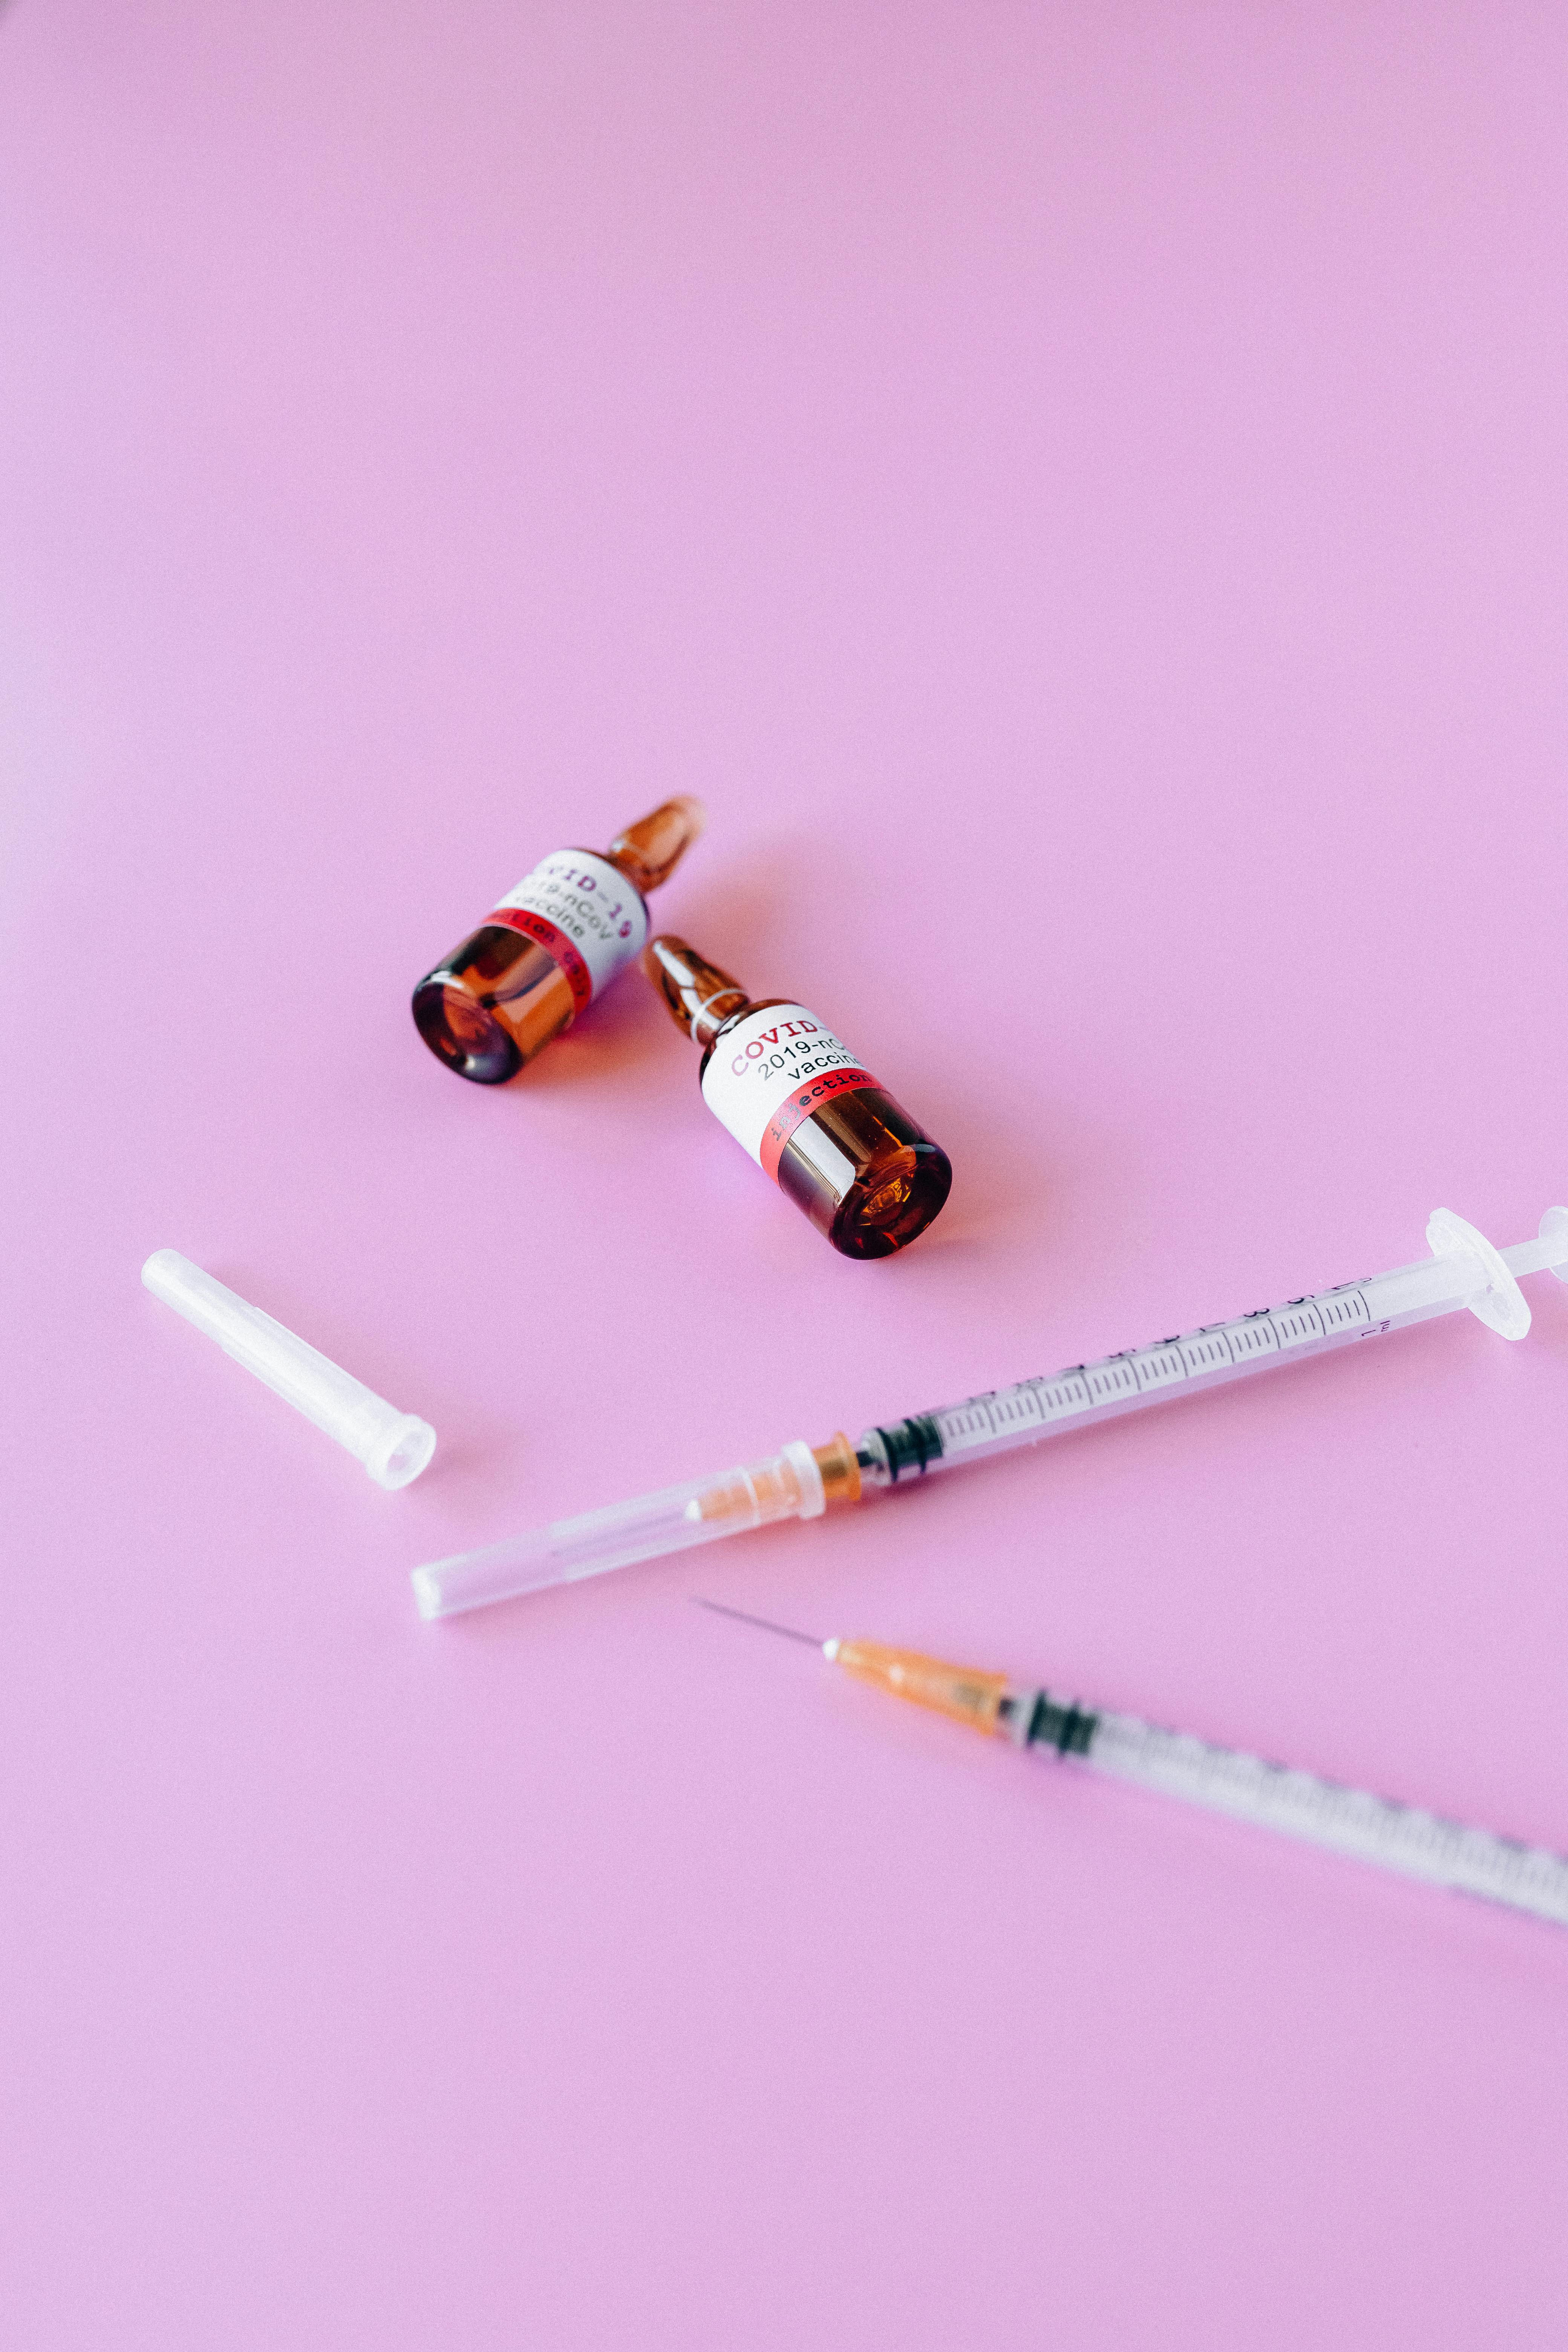 2019 n cov vaccine and syringes